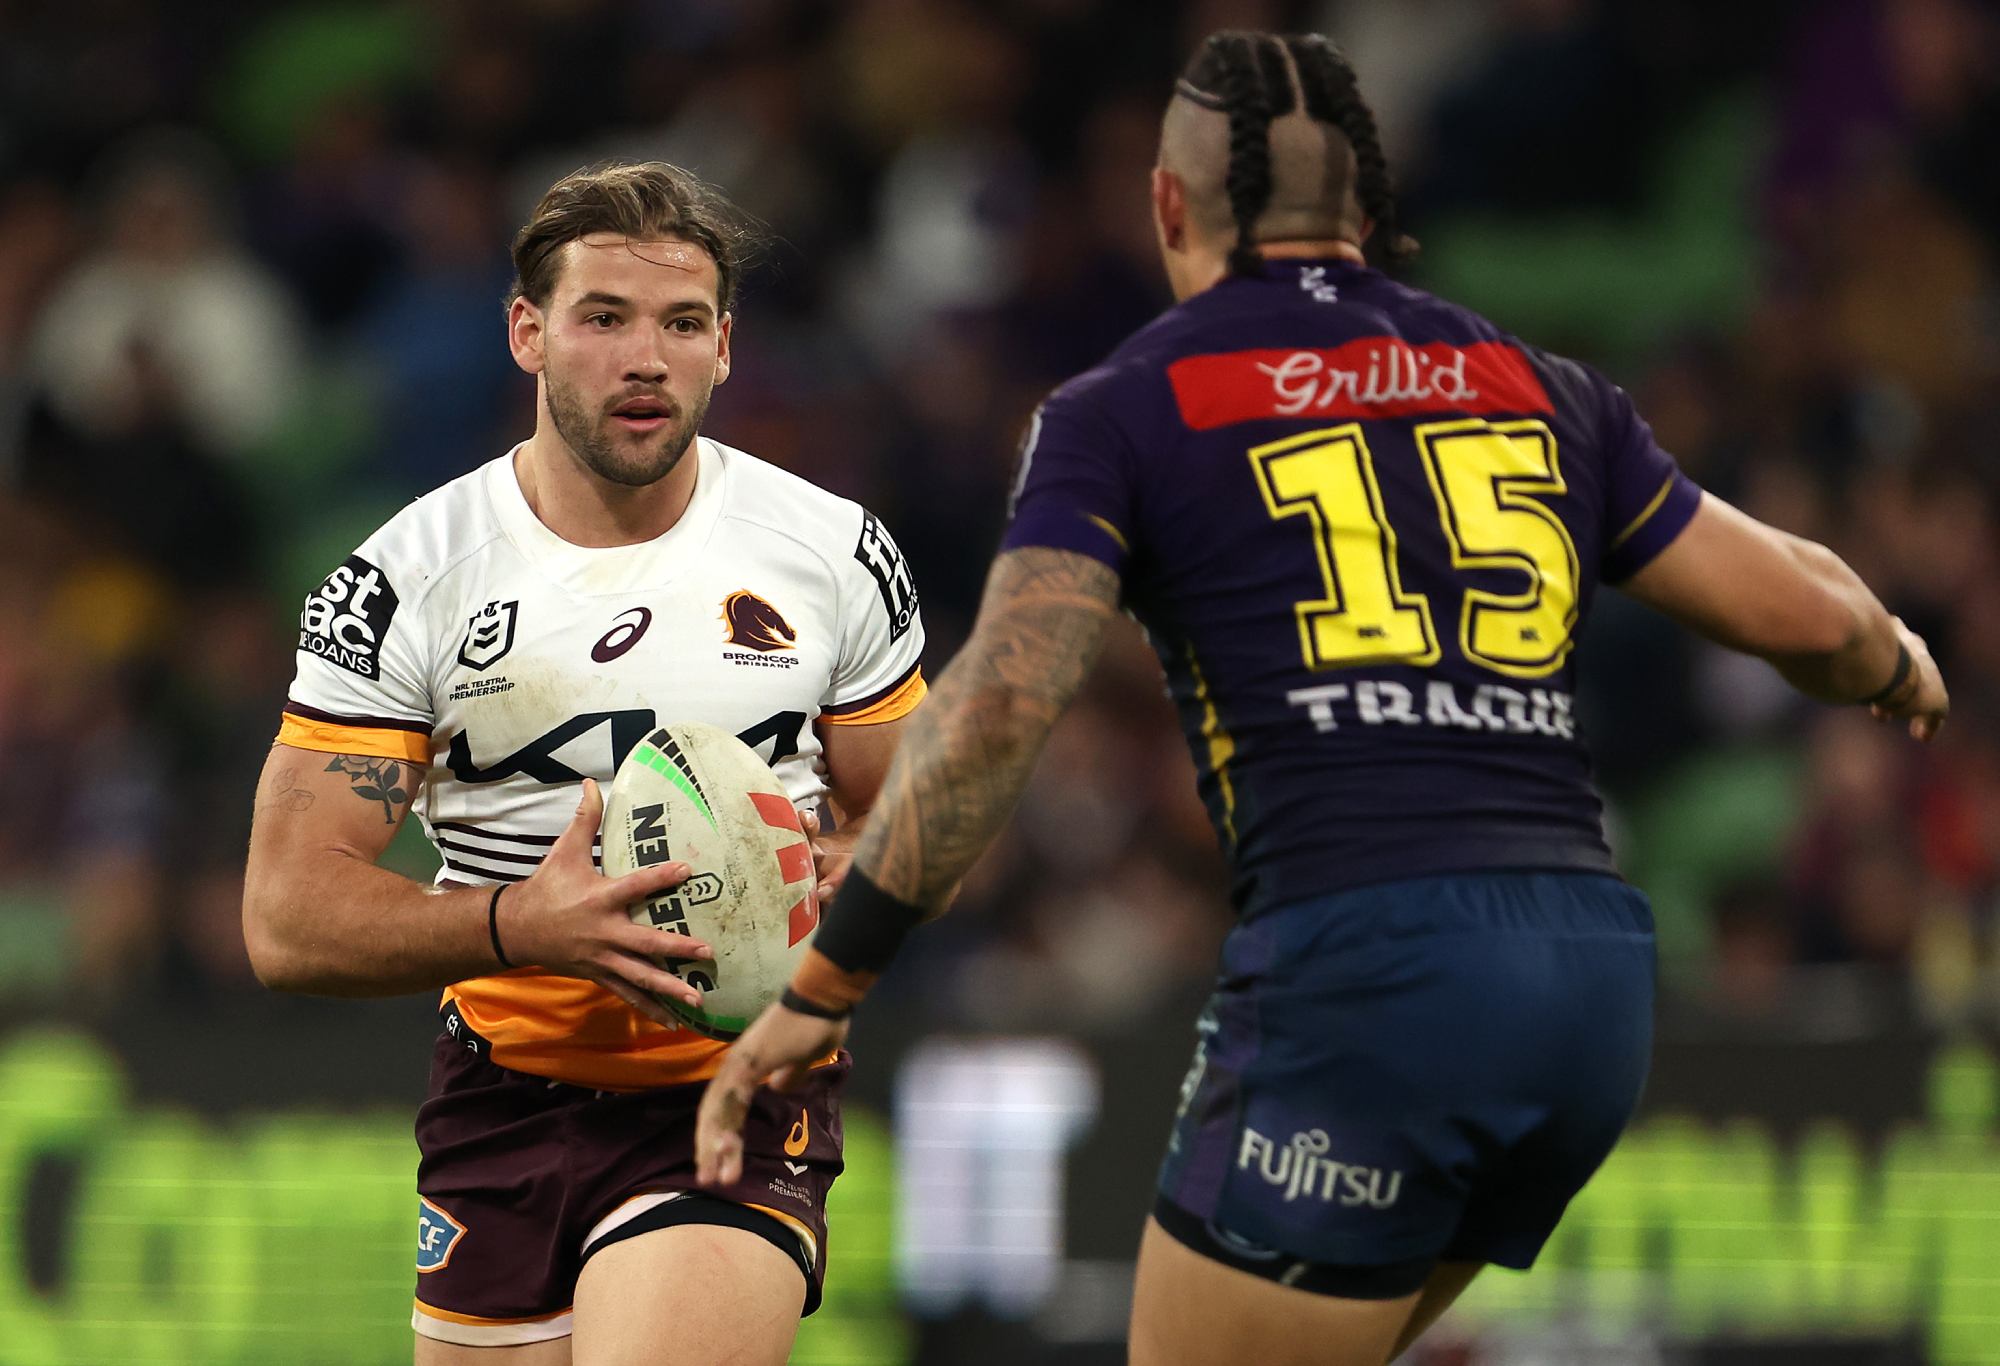 MELBOURNE, AUSTRALIA - MAY 11: Patrick Carrigan of the Broncos runs the ball during the round 11 NRL match between Melbourne Storm and Brisbane Broncos at AAMI Park on May 11, 2023 in Melbourne, Australia. (Photo by Robert Cianflone/Getty Images)